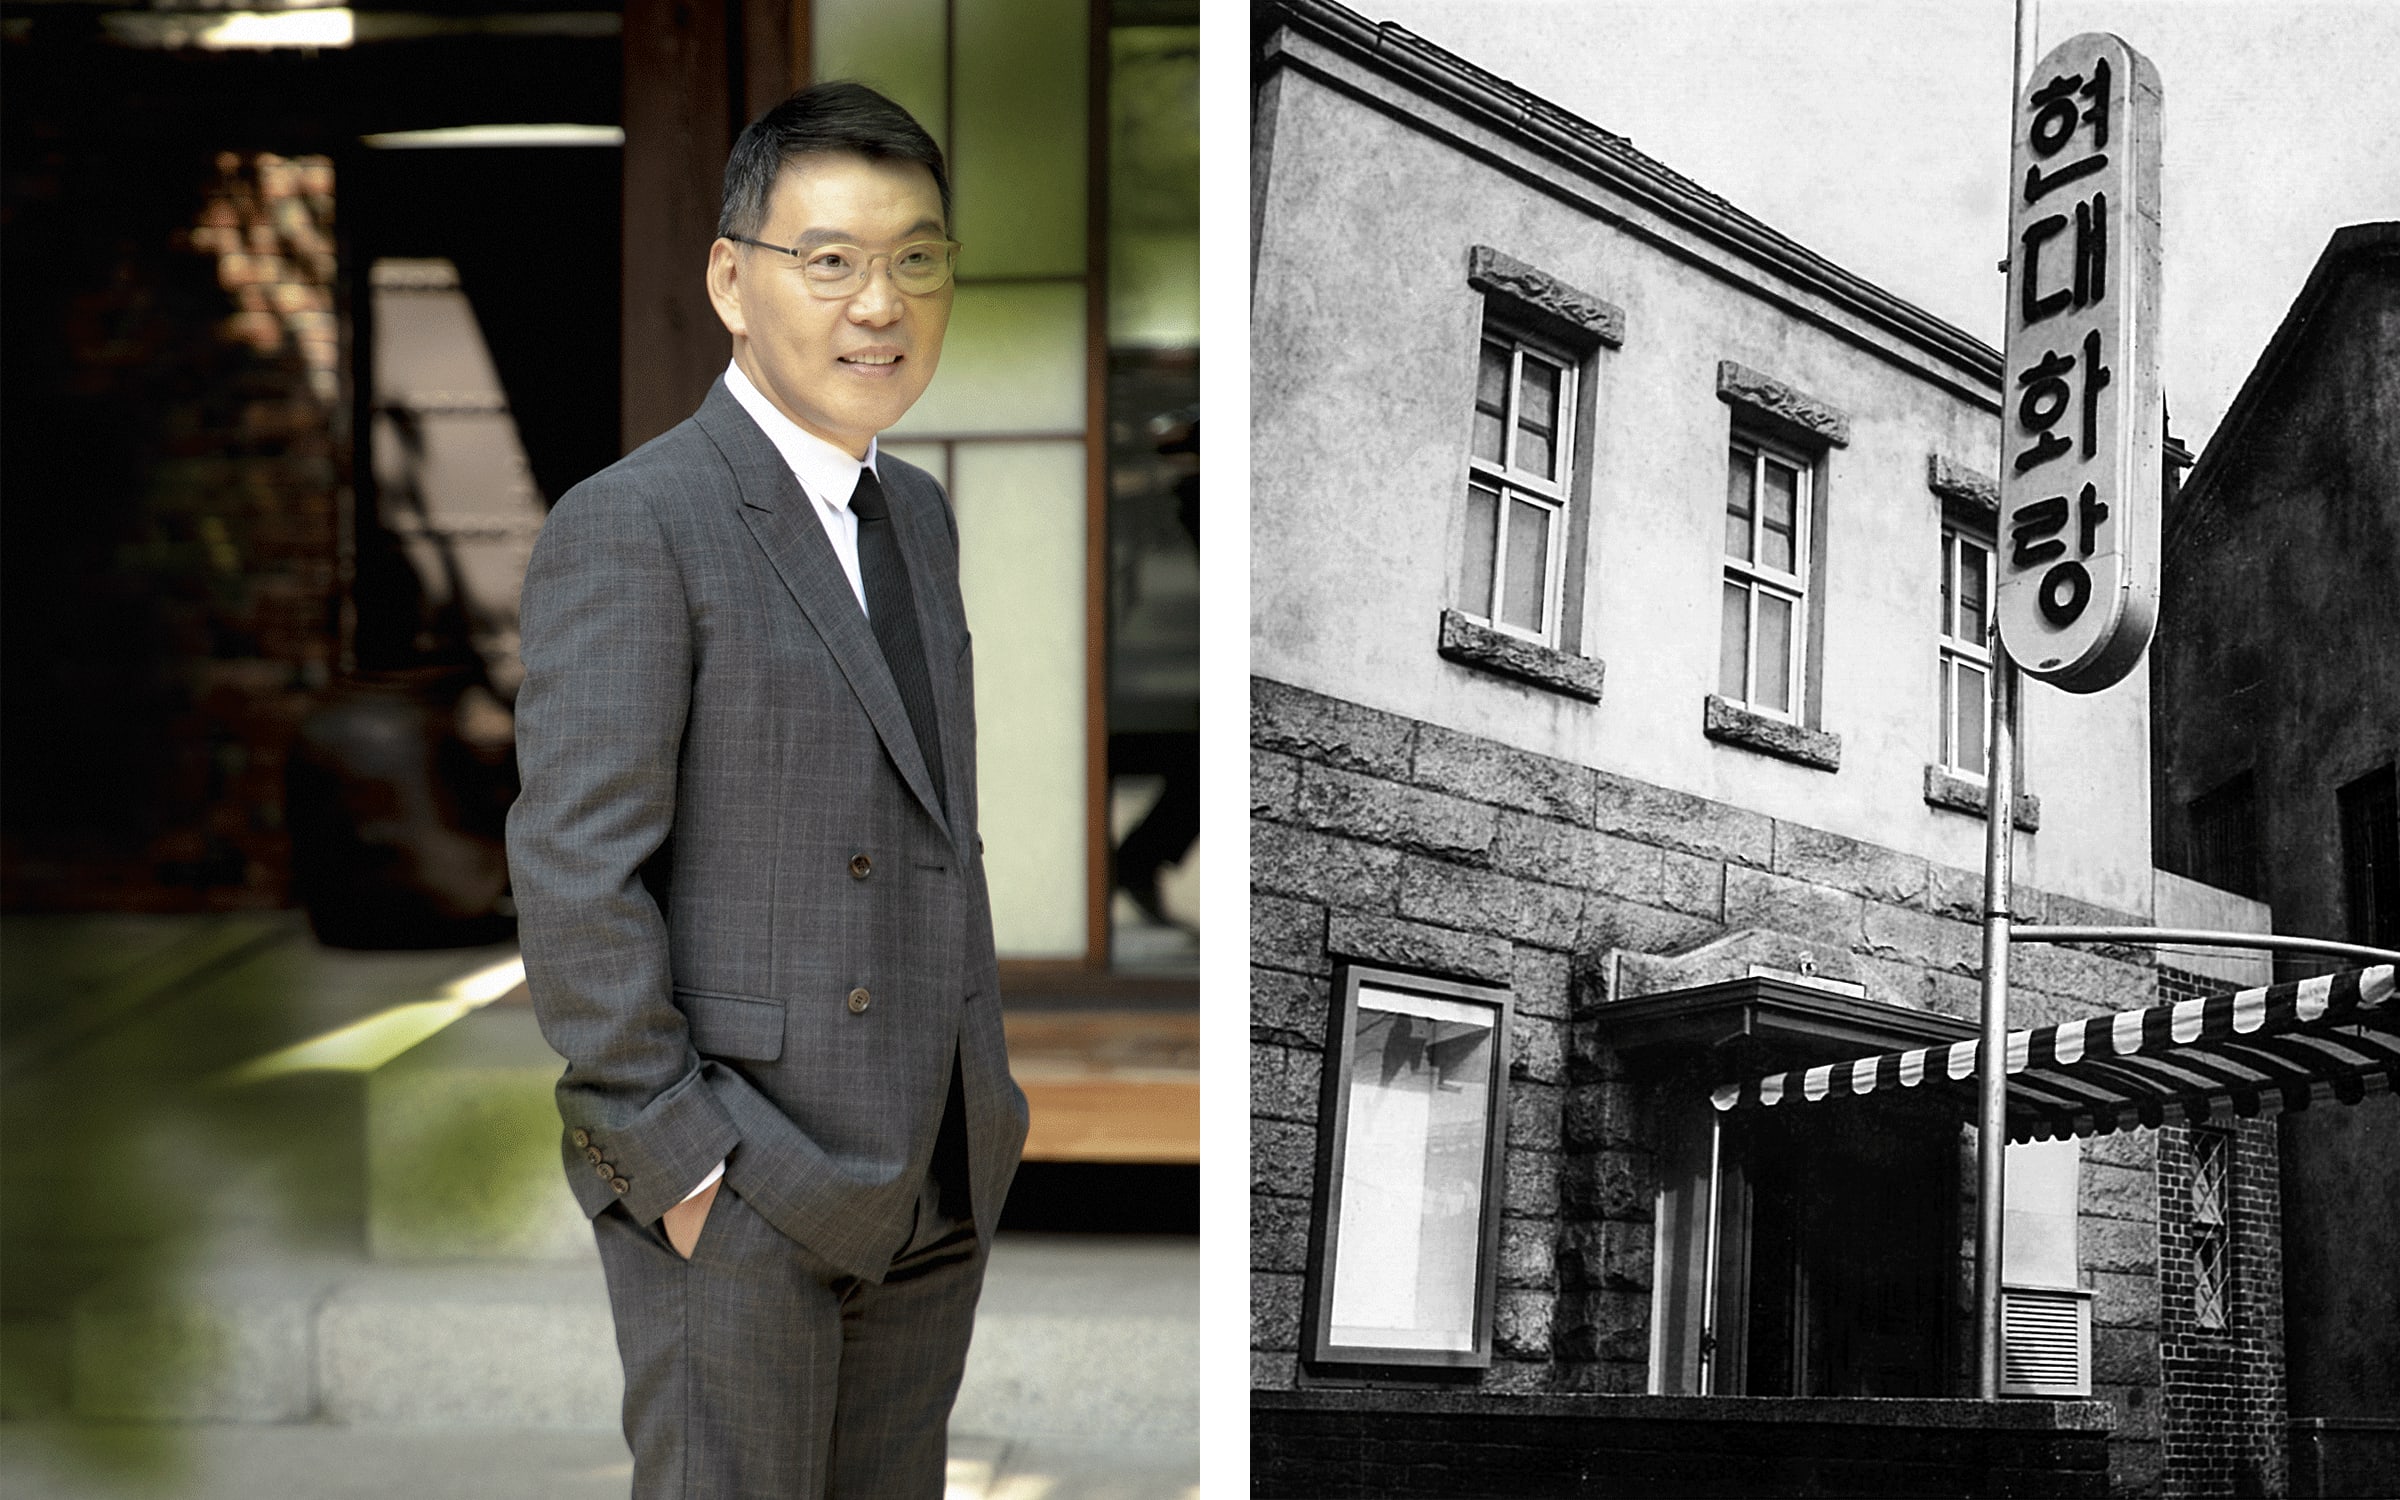 Left: HyungTeh Do, owner and CEO of Gallery Hyundai. Photograph by Sarah Koeke for Art Basel. Right: Photograph of Gallery Hyundai’s original building. Courtesy of Gallery Hyundai.